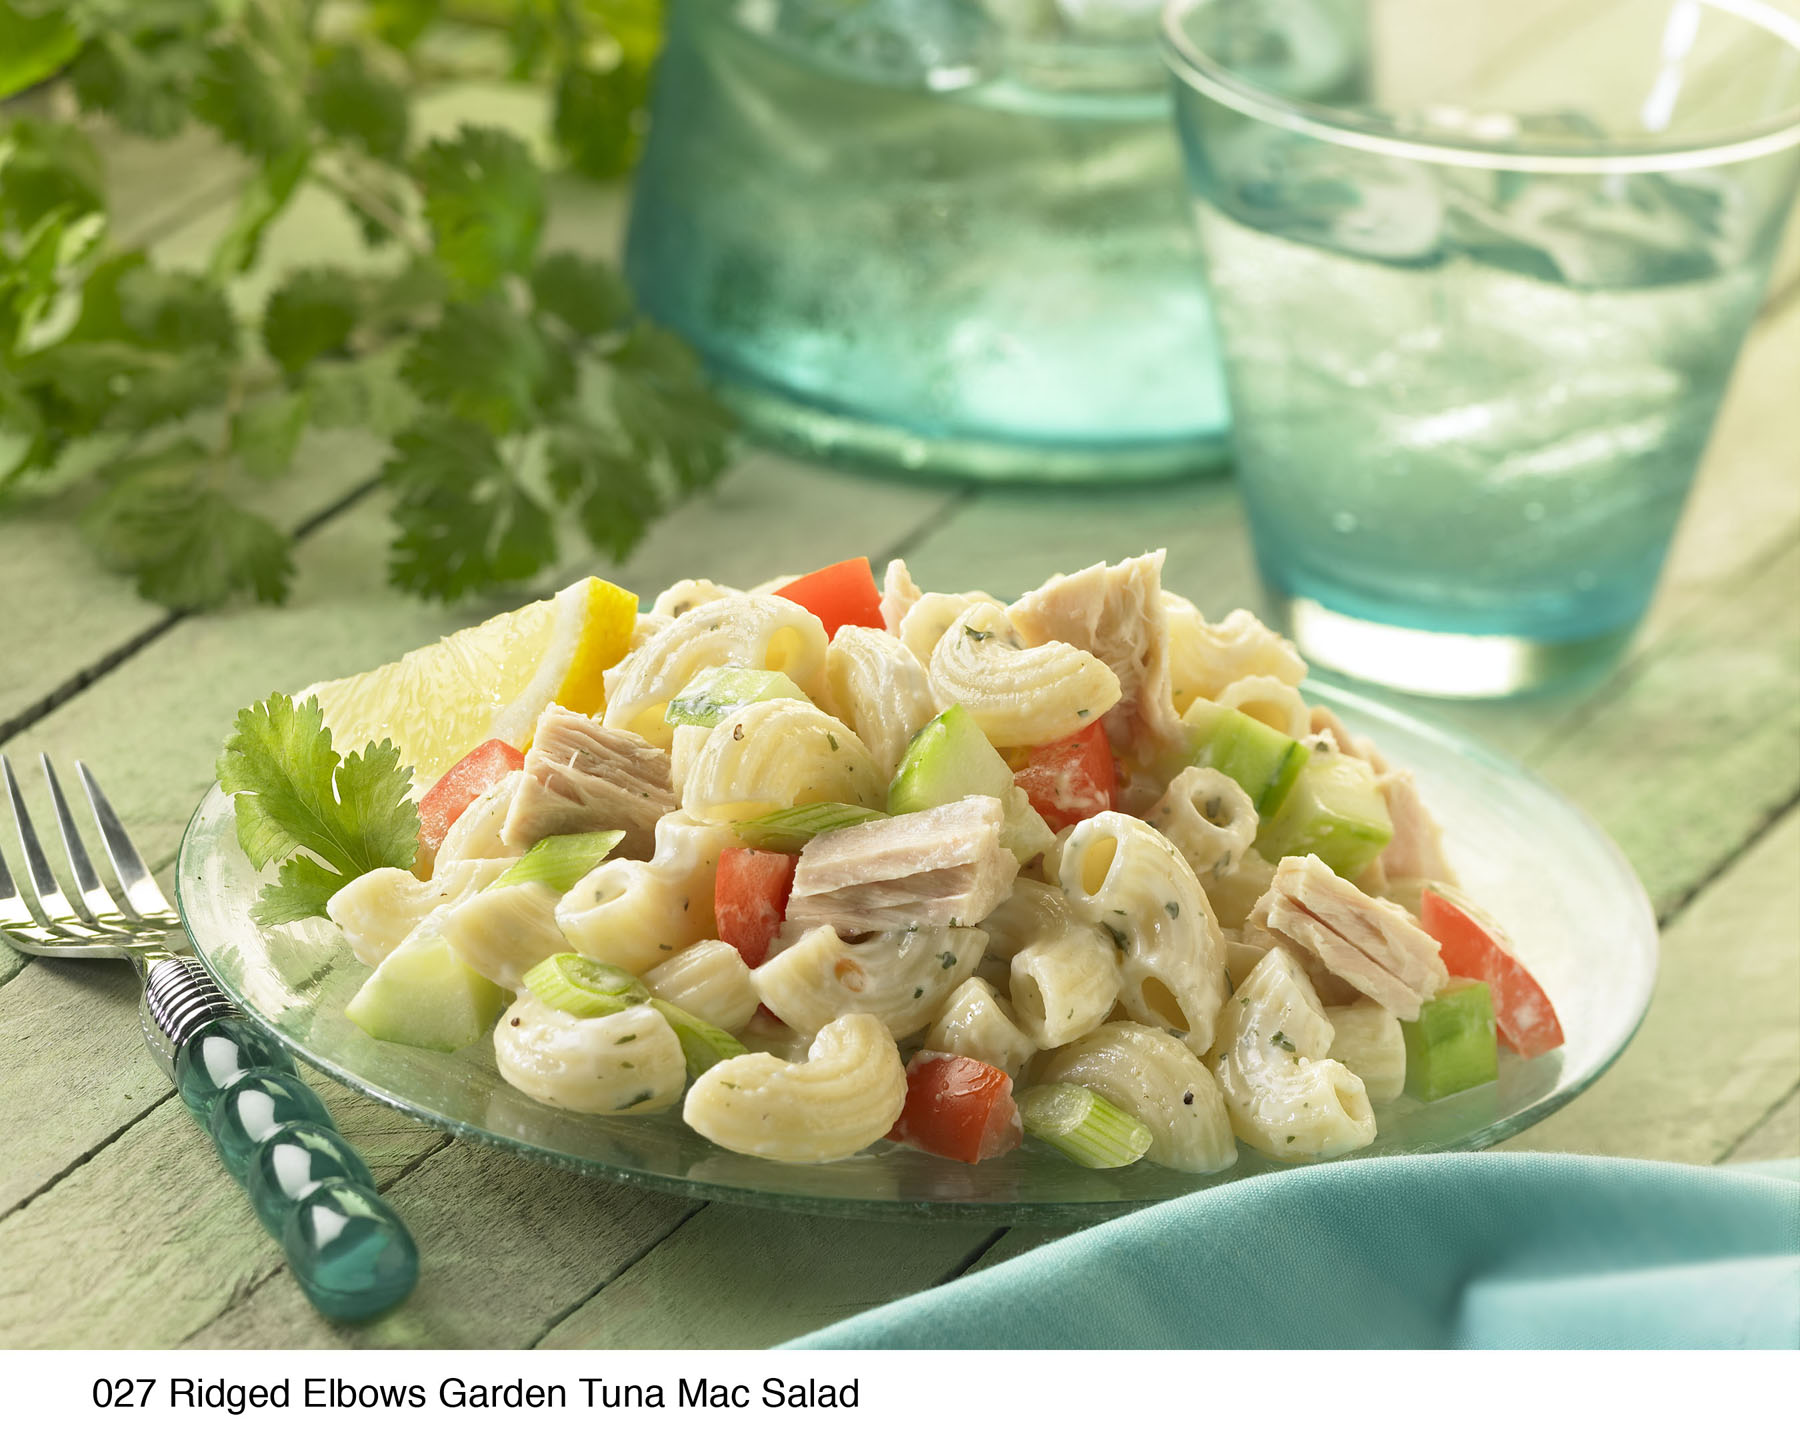 Elbows paired with tuna, tomatoes, cucumber, and green onions in a mayonnaise sauce